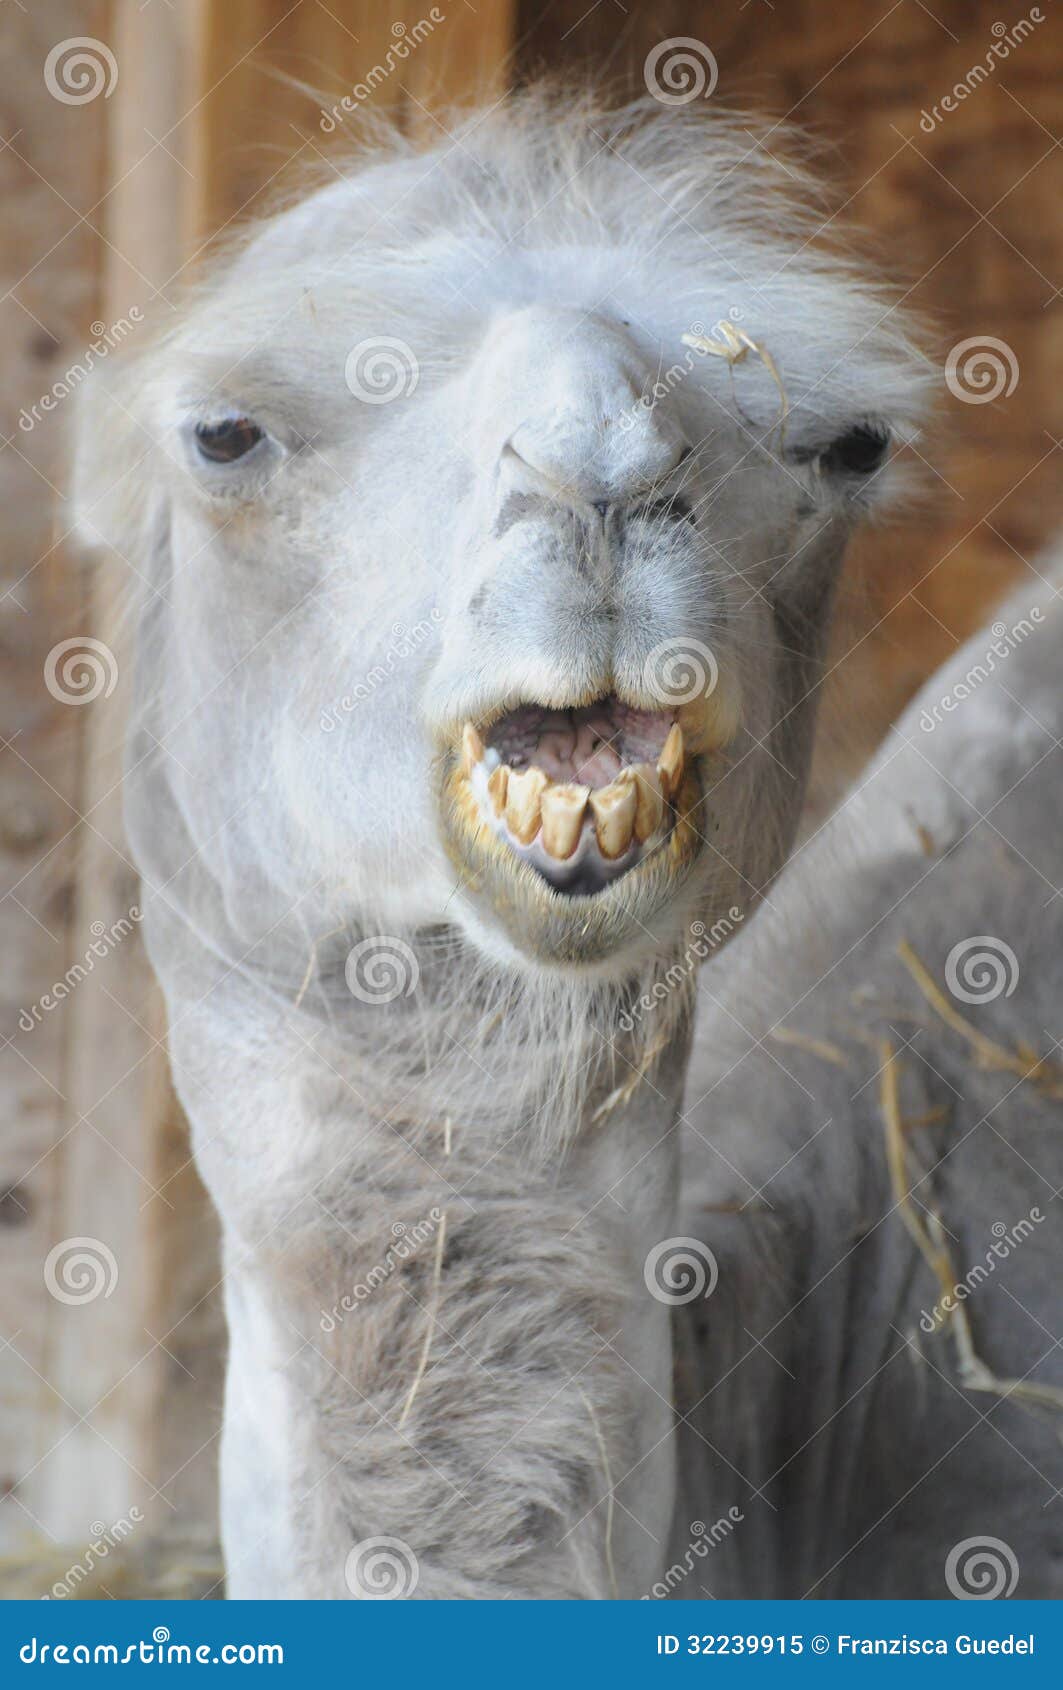 Funny Camel With Bad Teeth Royalty Free Stock Photo   Image: 32239915